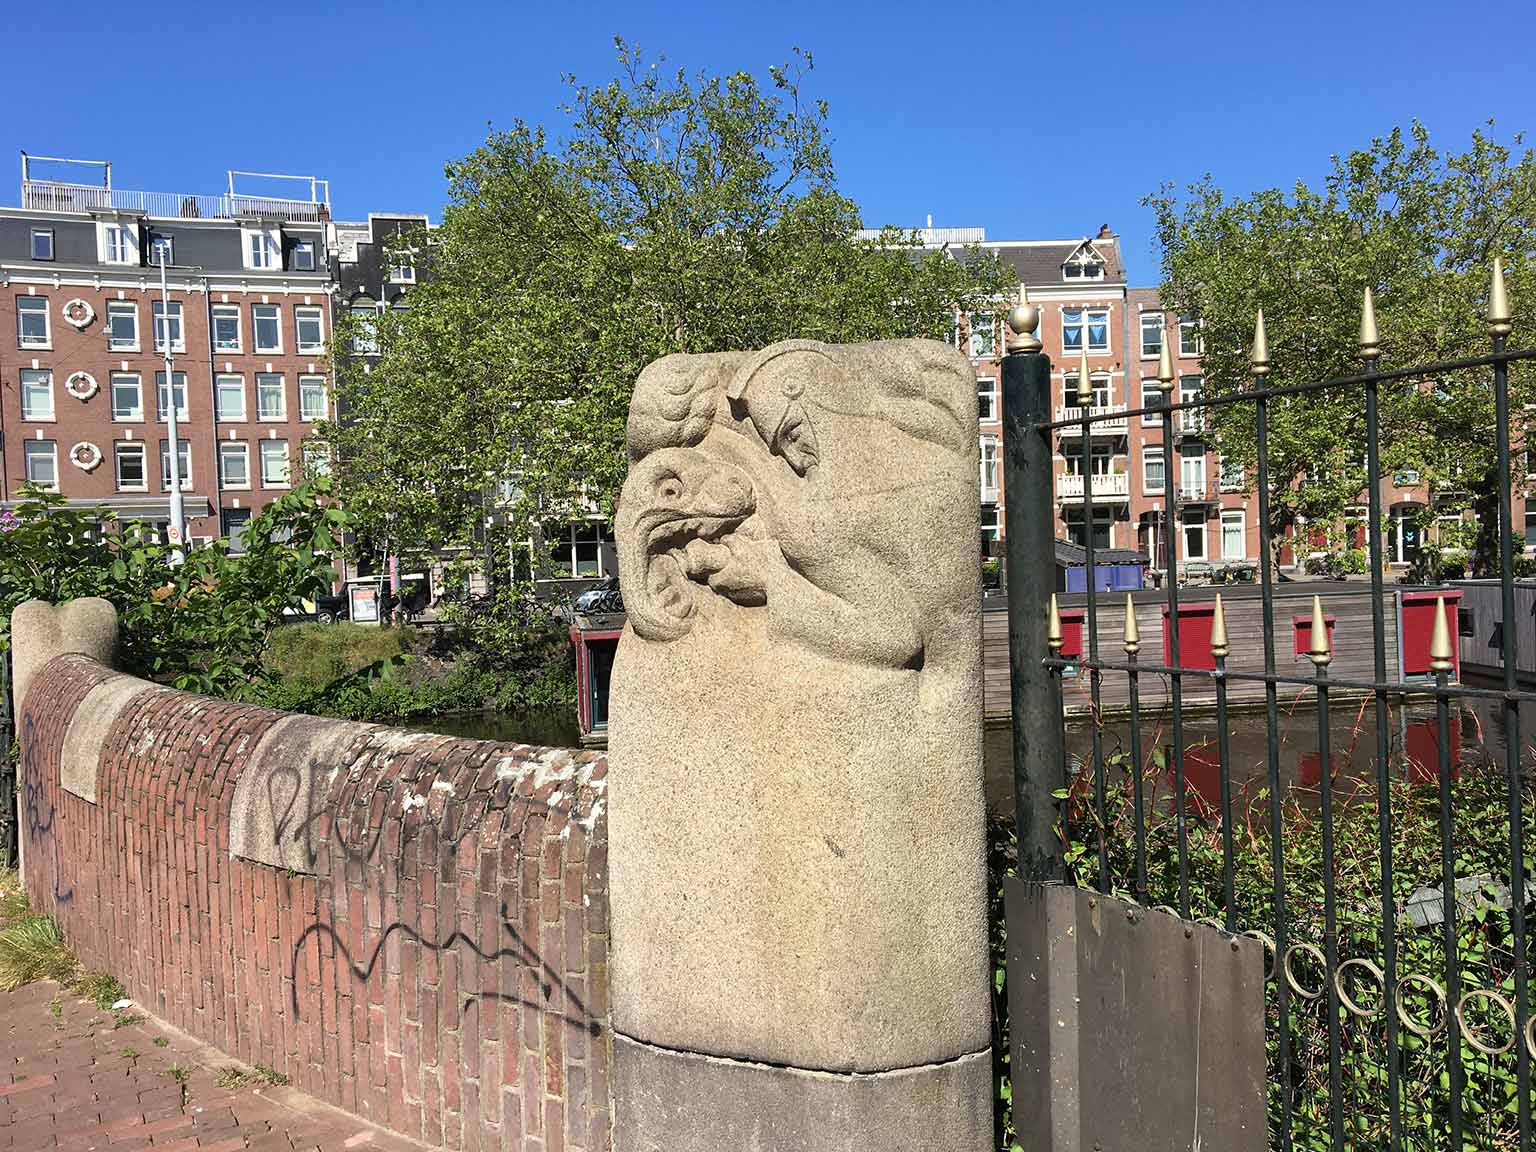 Rijckerbrug, Amsterdam, with statue of fireman battling a fire-breathing dragon